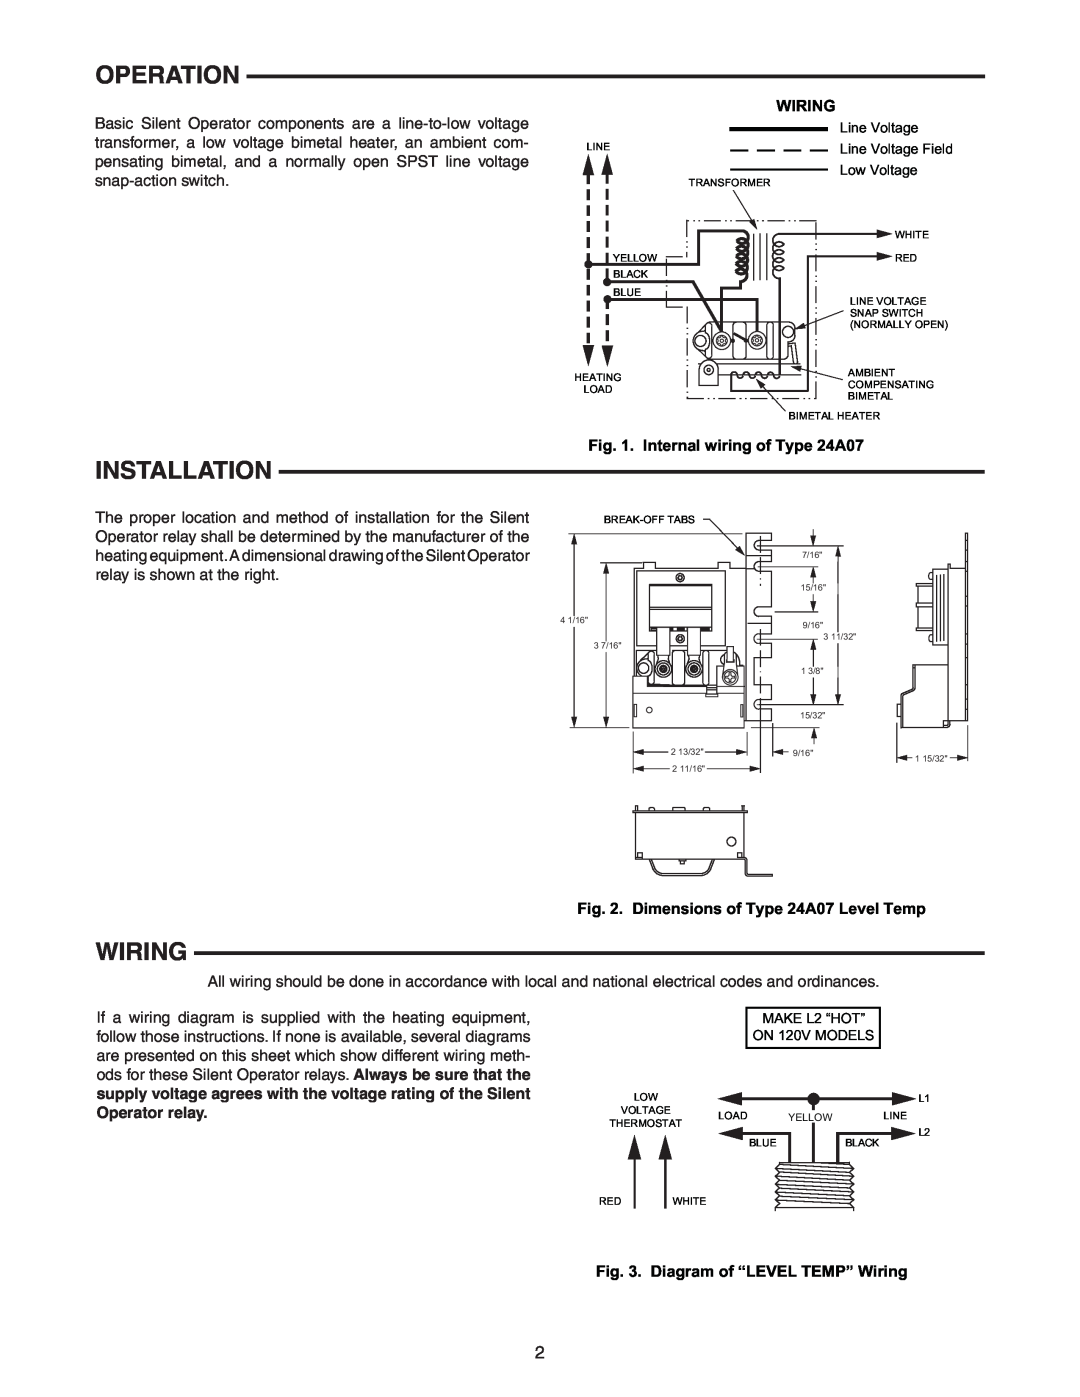 White Rodgers 24A07A-1 operation, Installation, Internal wiring of Type 24A07, Diagram of “LEVEL TEMP” Wiring 